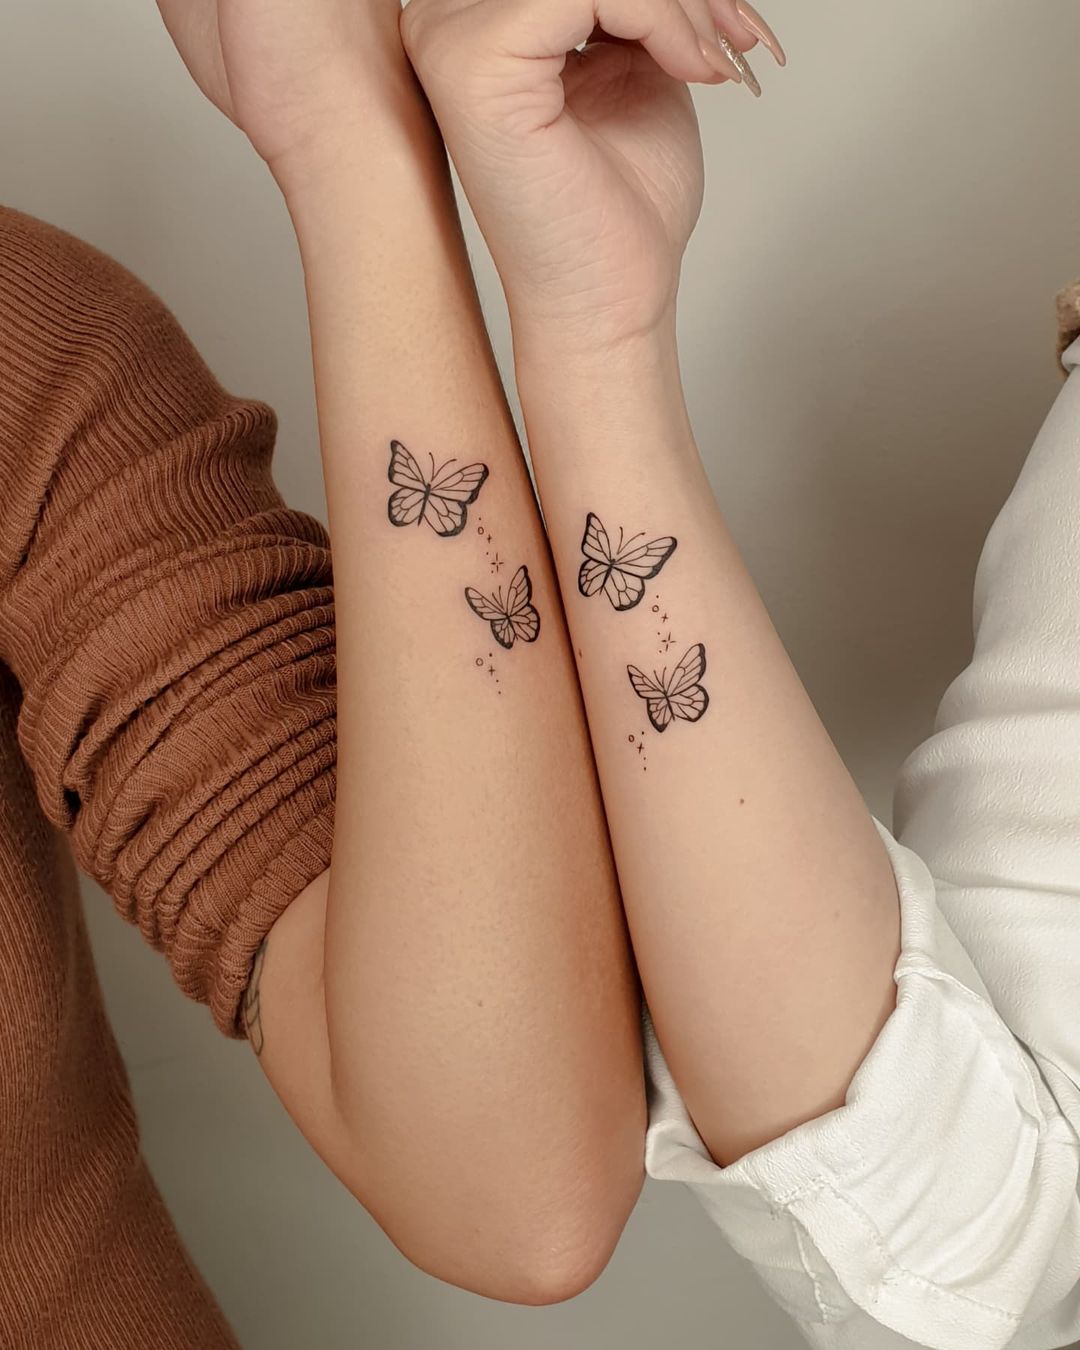 30+ Best Butterfly Tattoos Design You’ll Love To Get Next. Butterfly Tattoos for Girls